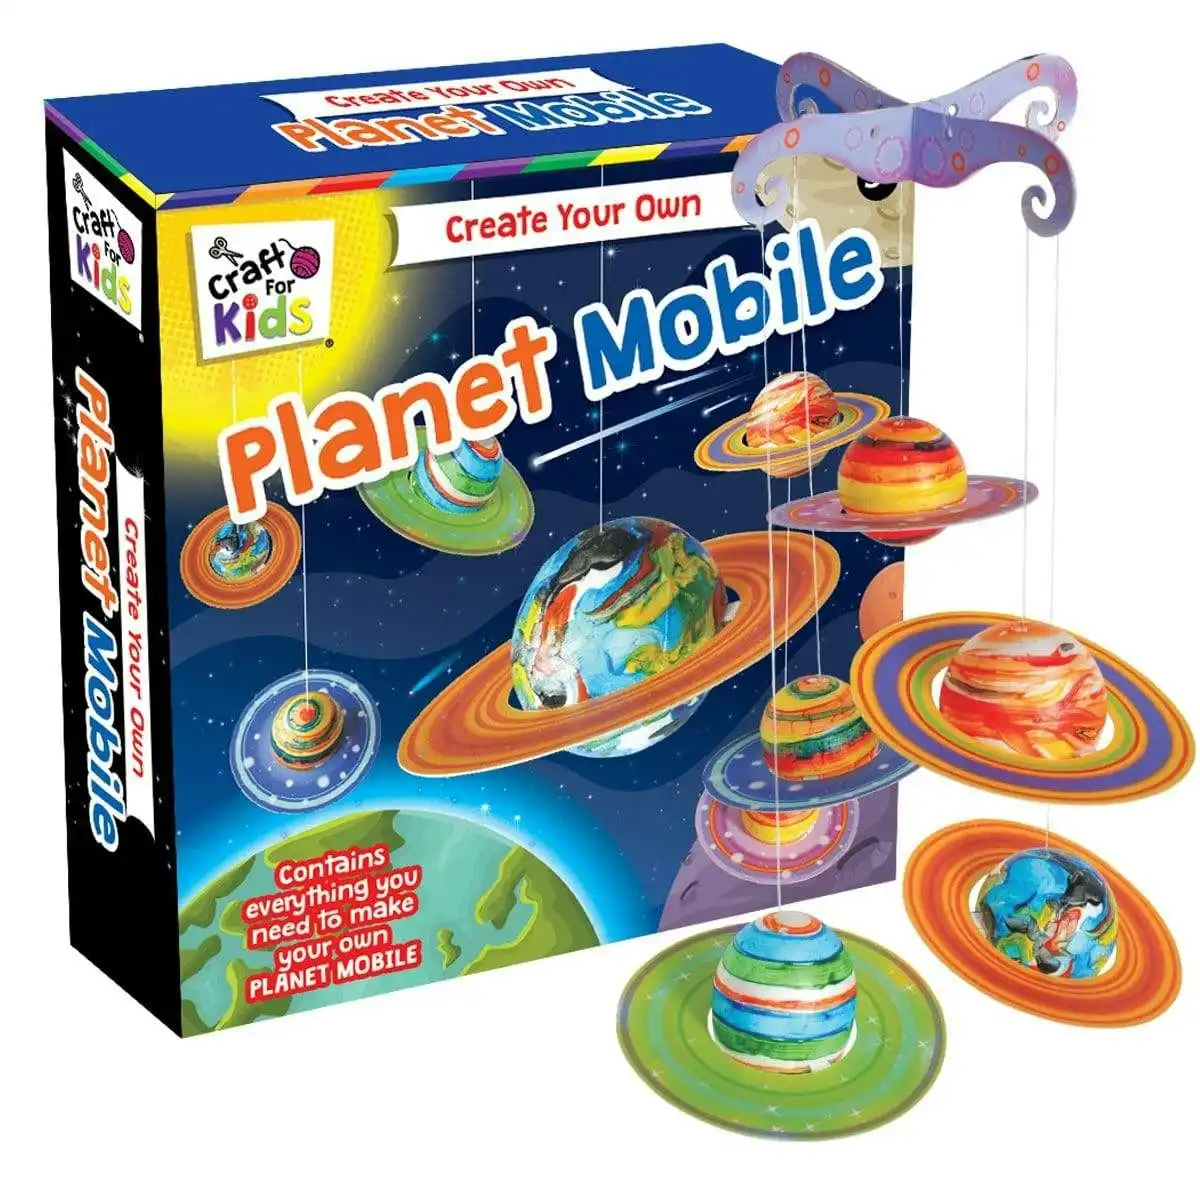 Craft for Kids Create Your Own Planet Mobile